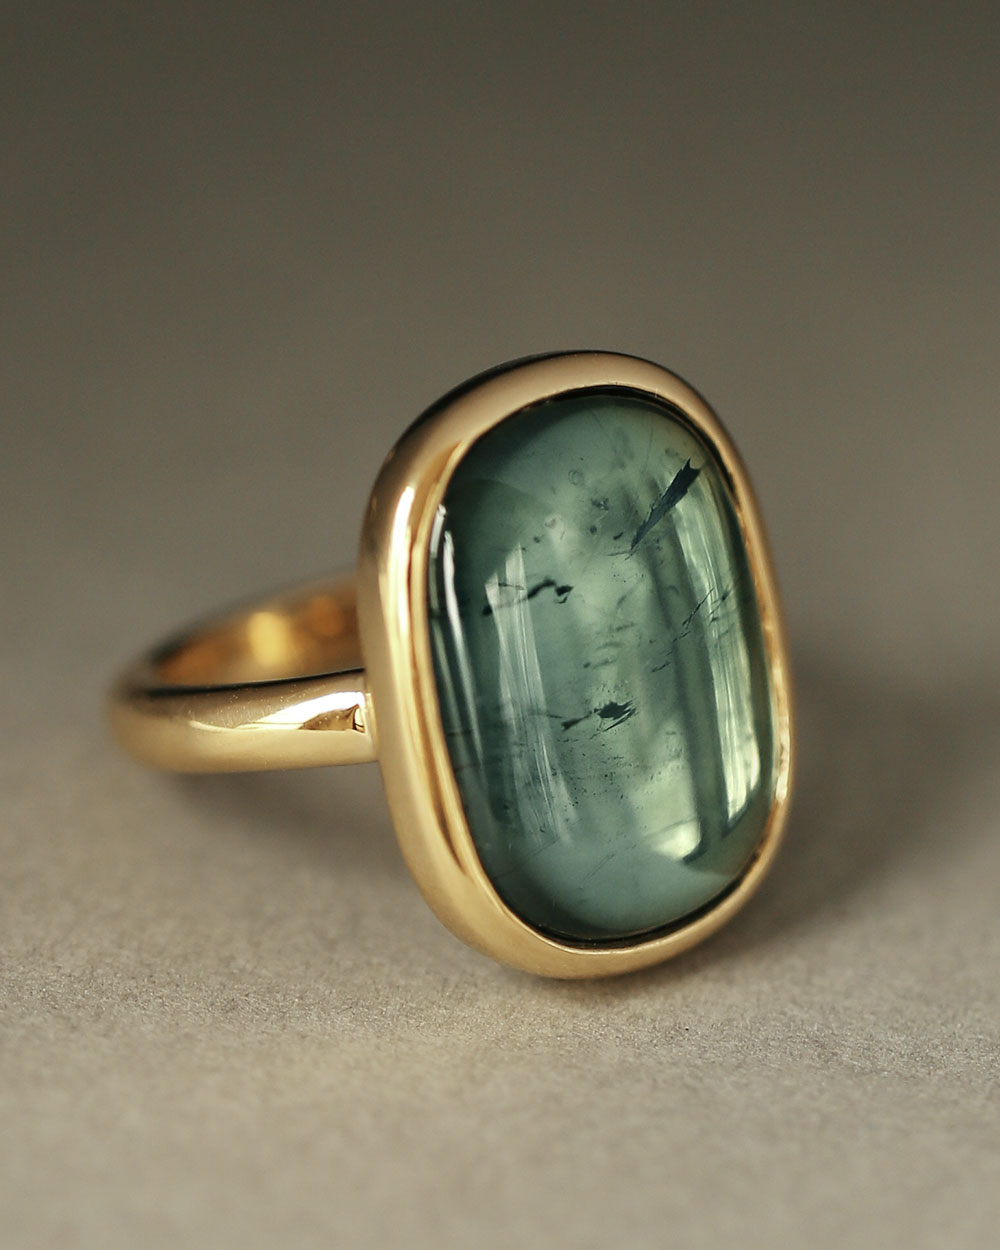 Lago di Como Estate Ring by George Rings Blue Green Tourmaline Cabochon Cocktail ring oval solid 18k gold